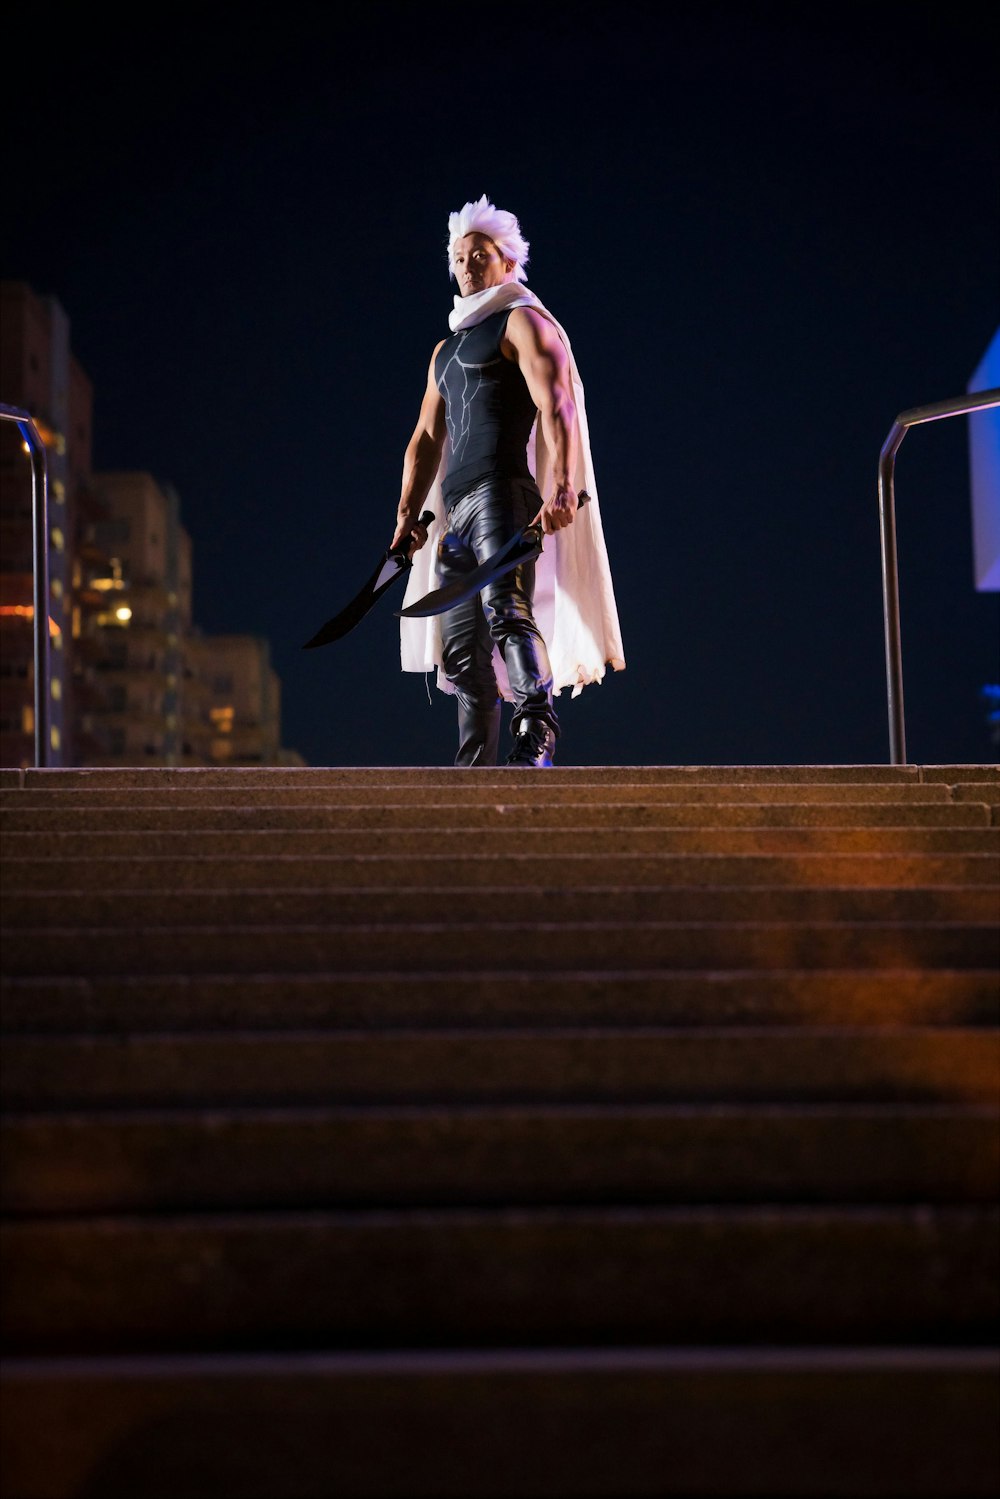 a man in a costume walking up some steps